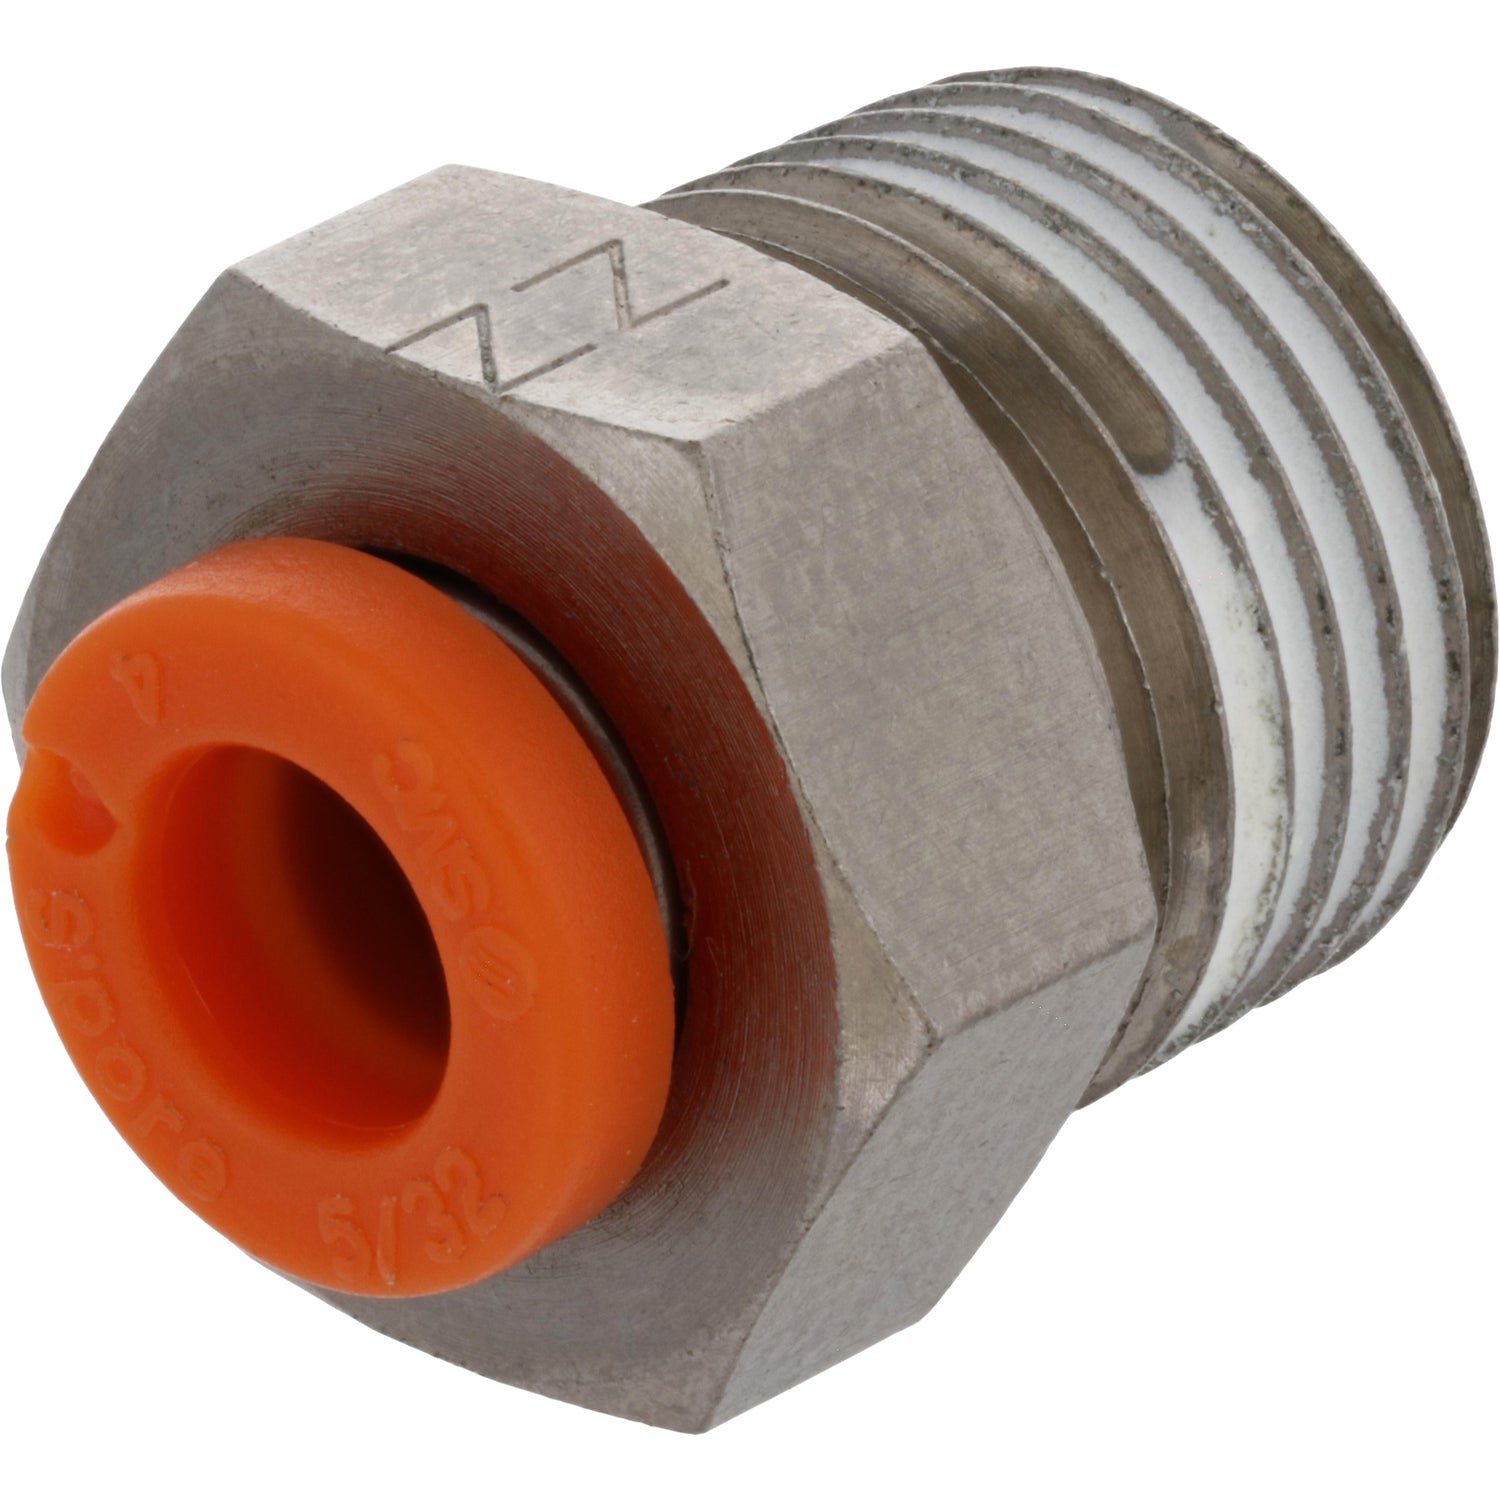 Brass threaded connector with orange plastic collar on white background. 